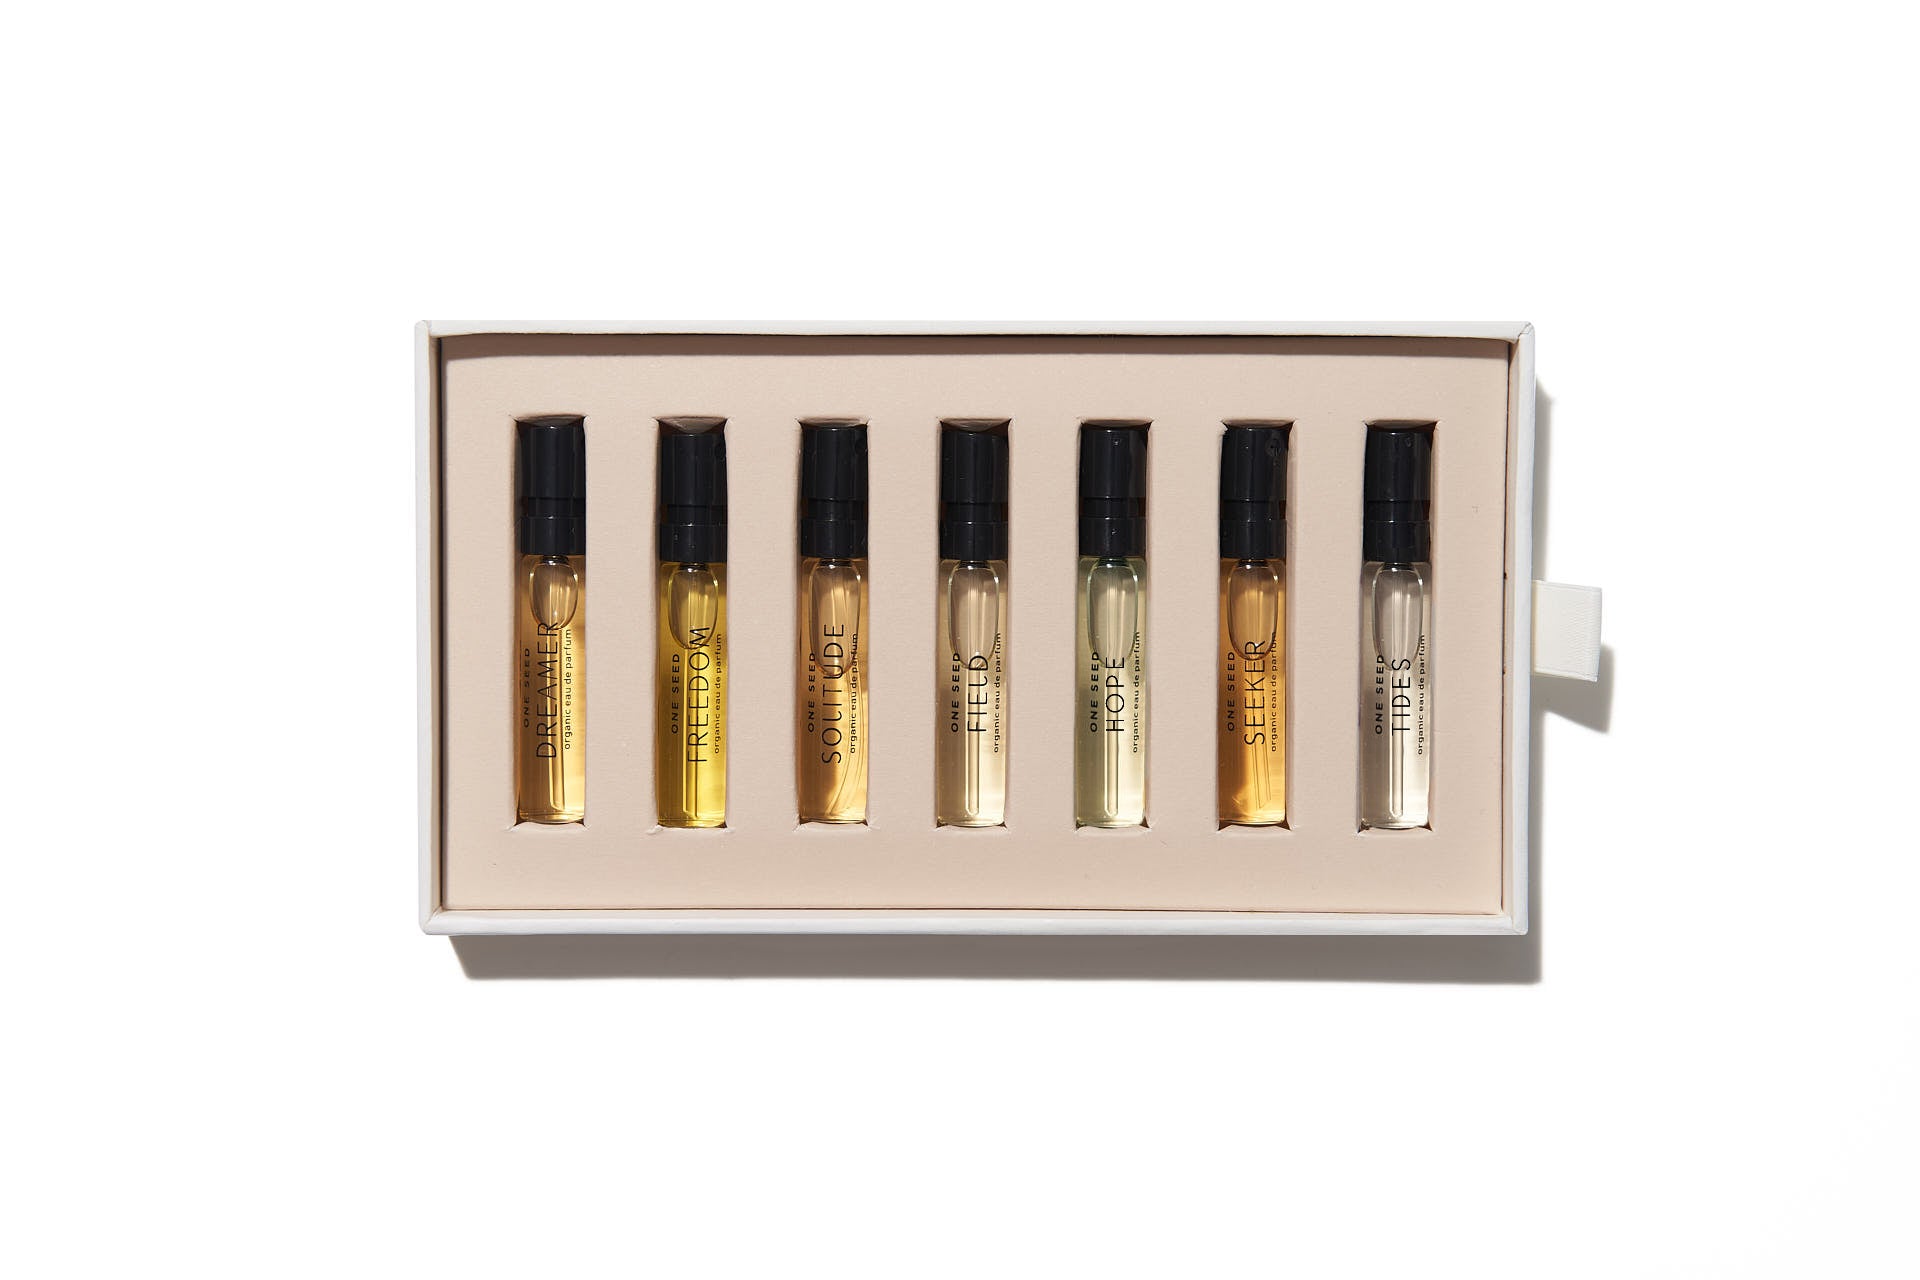 Best Sellers 7-Piece Organic Perfume Discovery Set